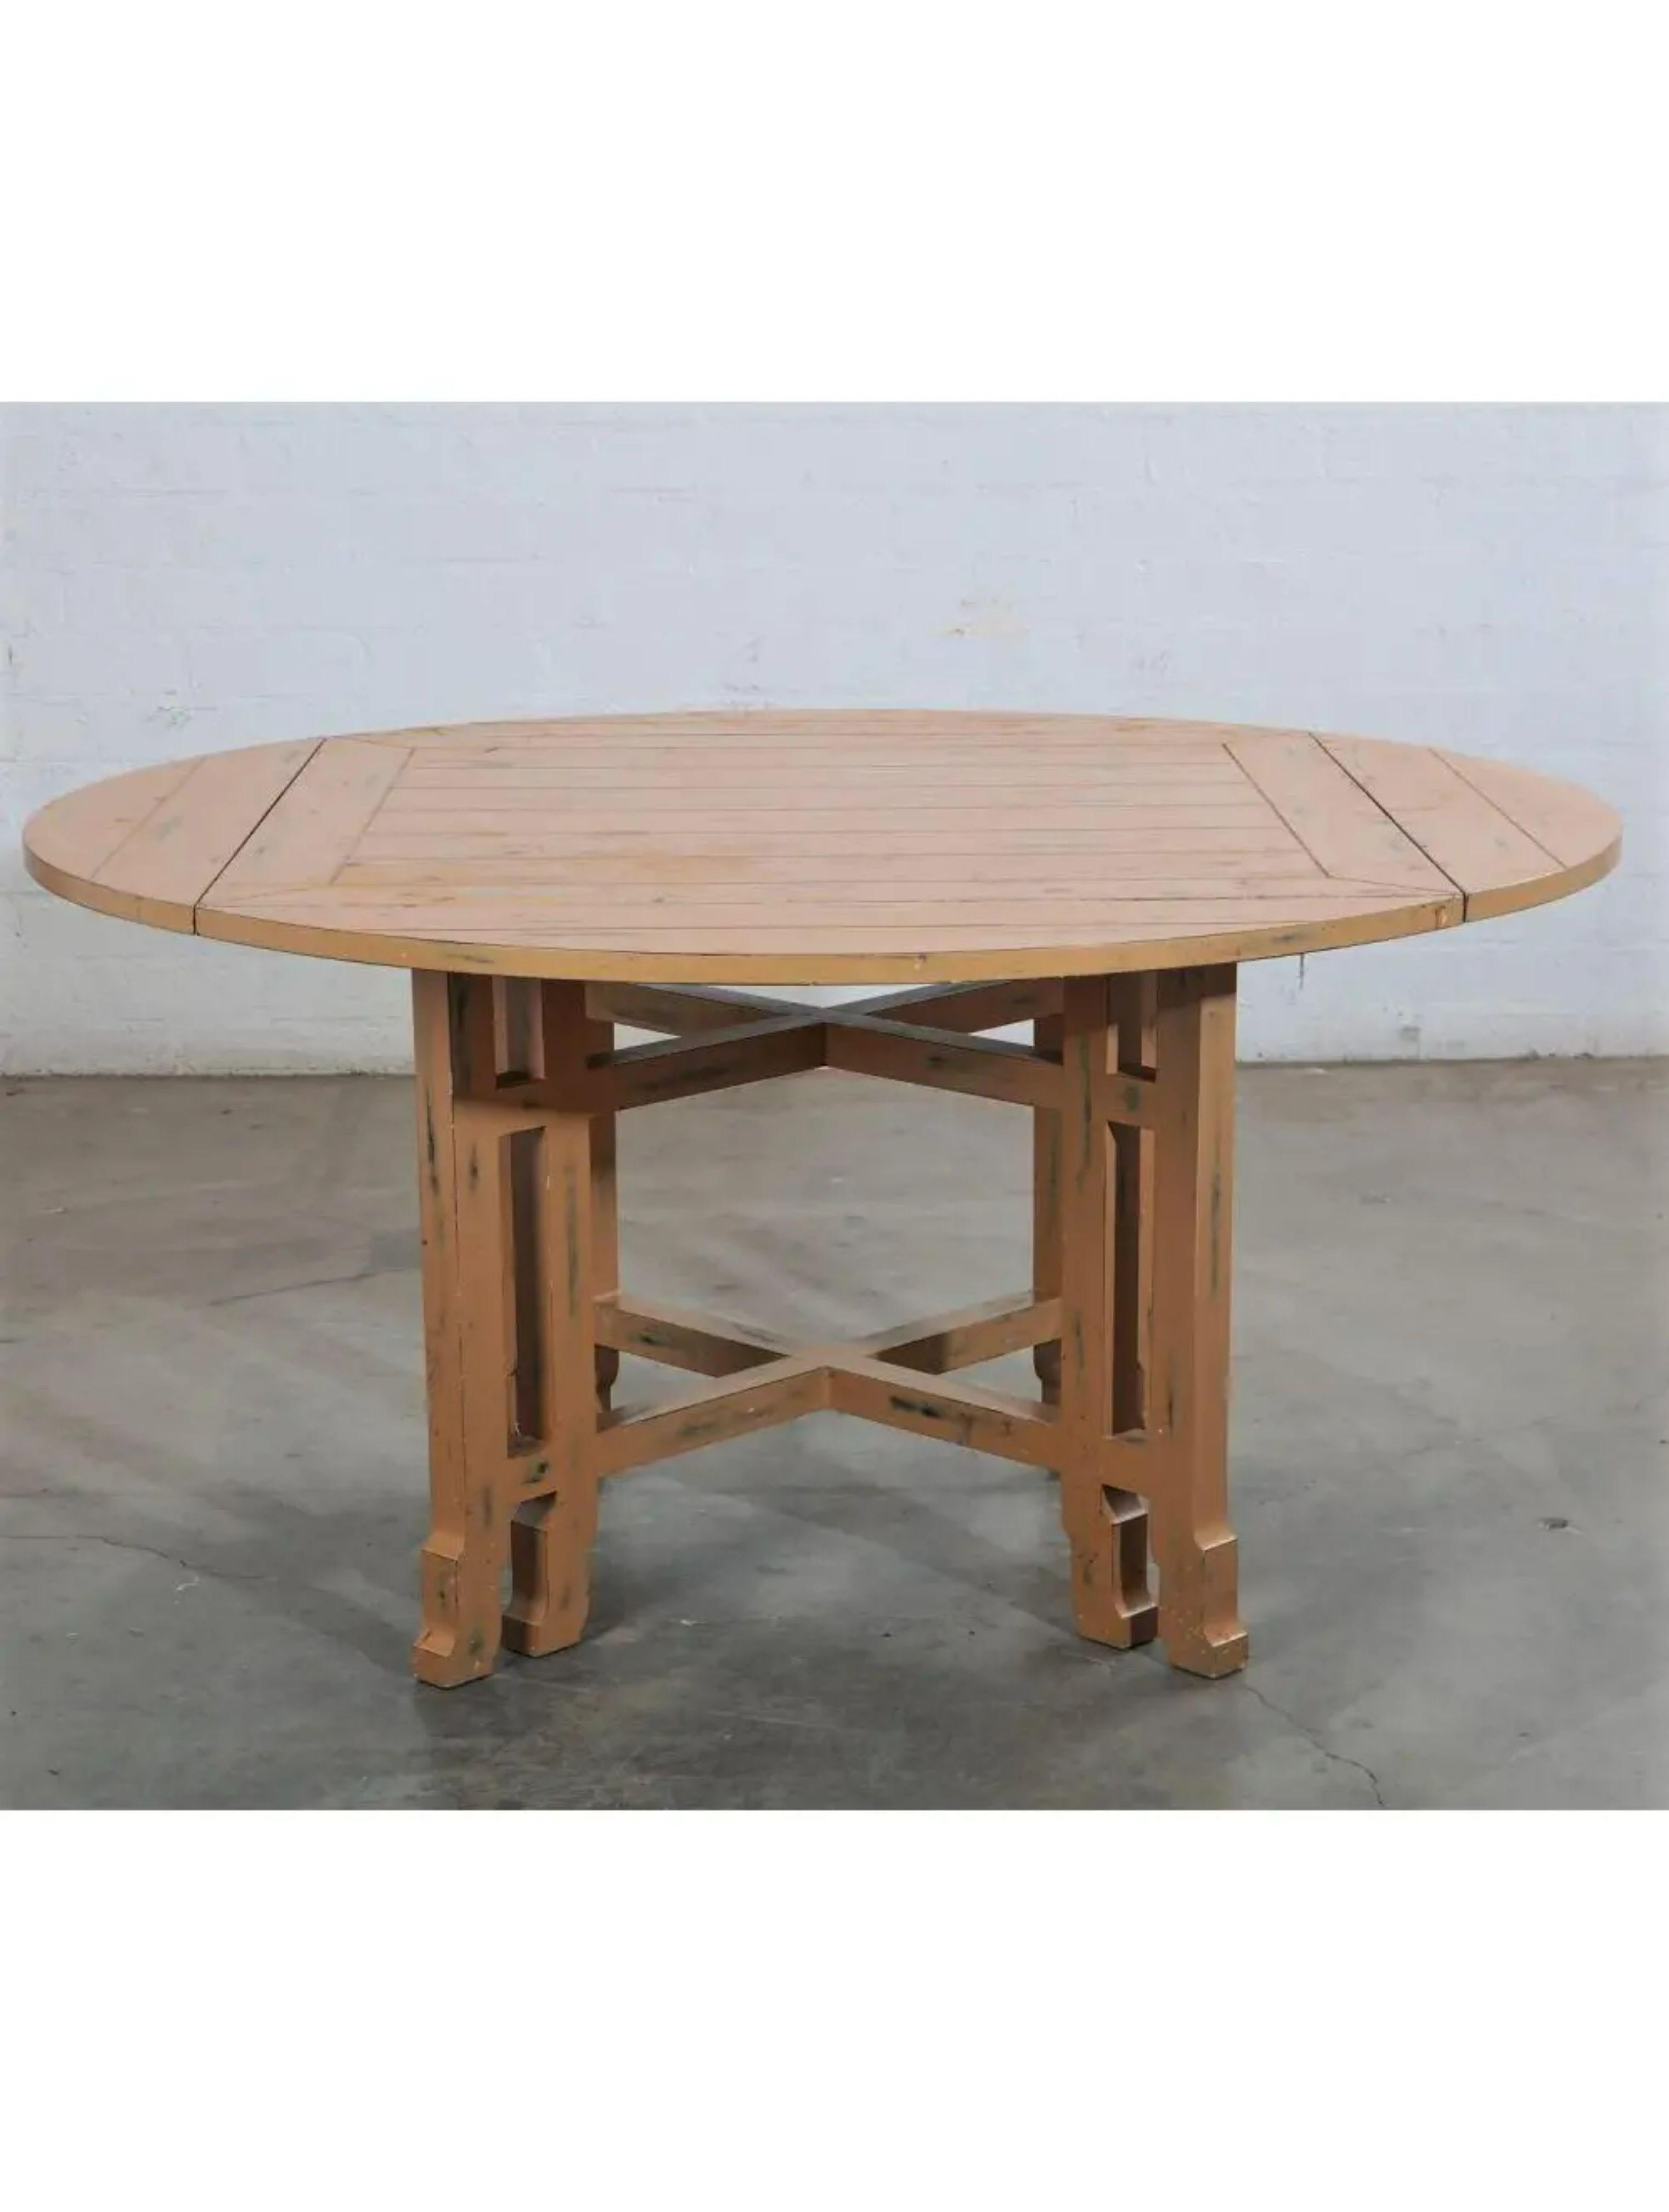 Wood Minton-Spidell 19th Century Style Japanese Country Drop Leaf Breakfast Table